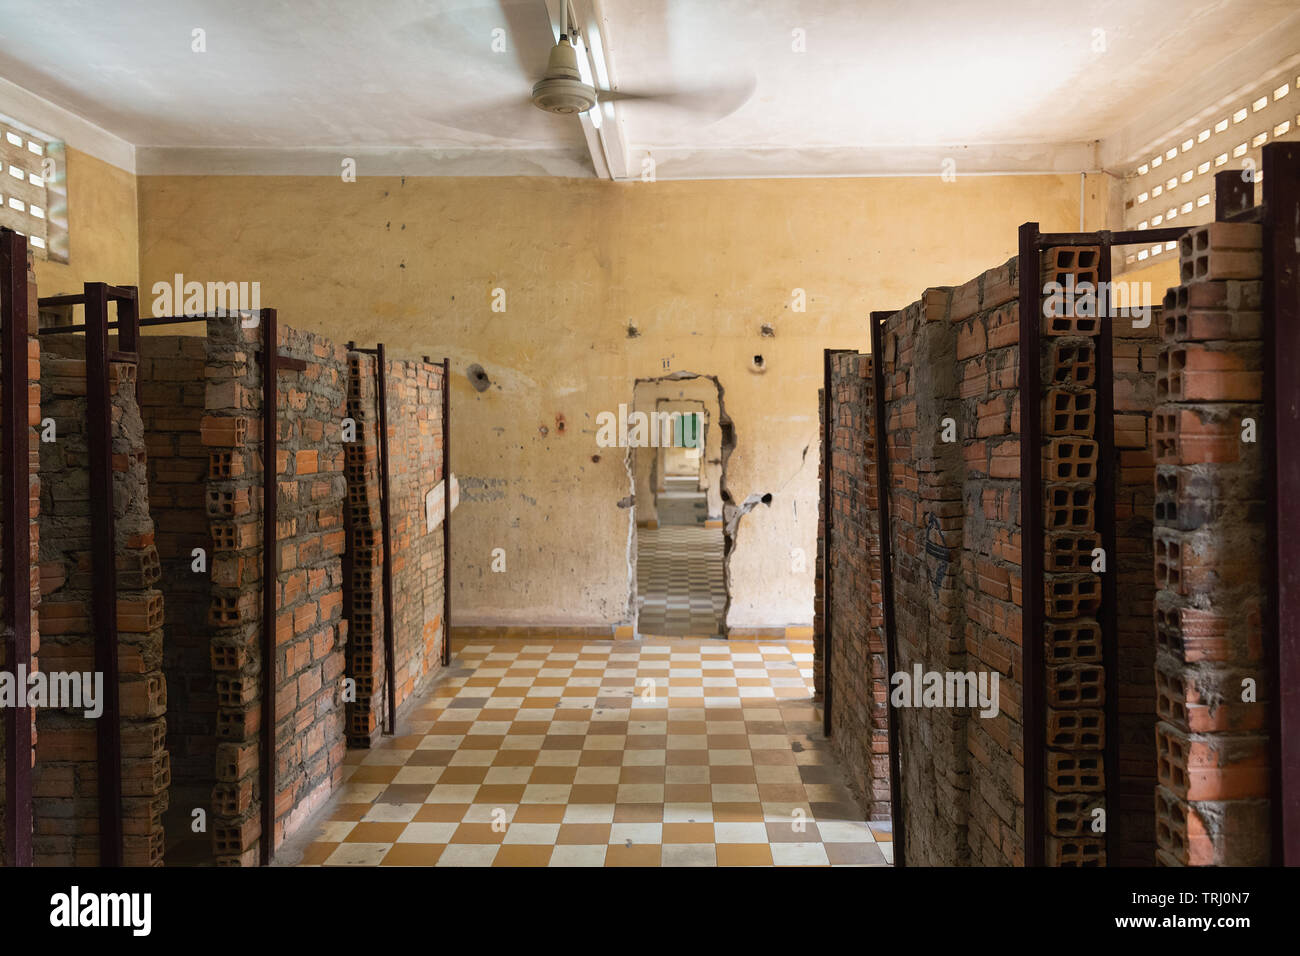 Rows of brick prison cells at Tuol Sleng Genocide Museum, Phnom Penh, Cambodia, Asia Stock Photo